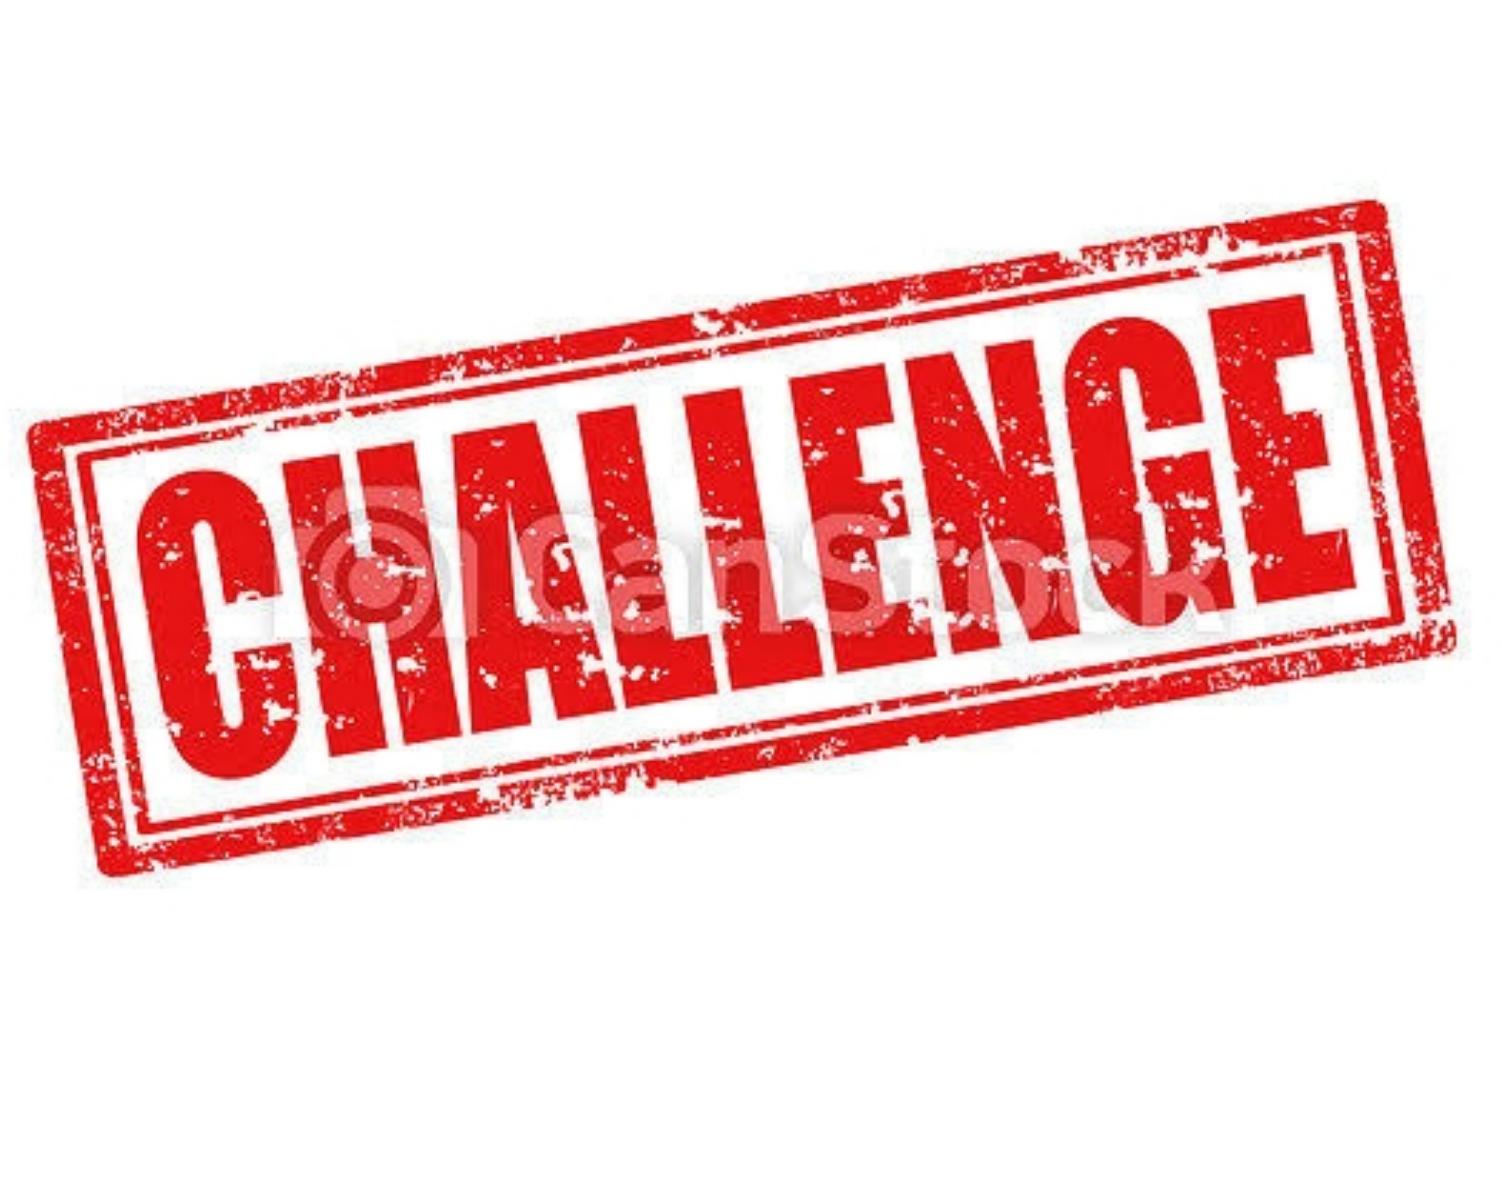 Challenges for Soft and Hard Side